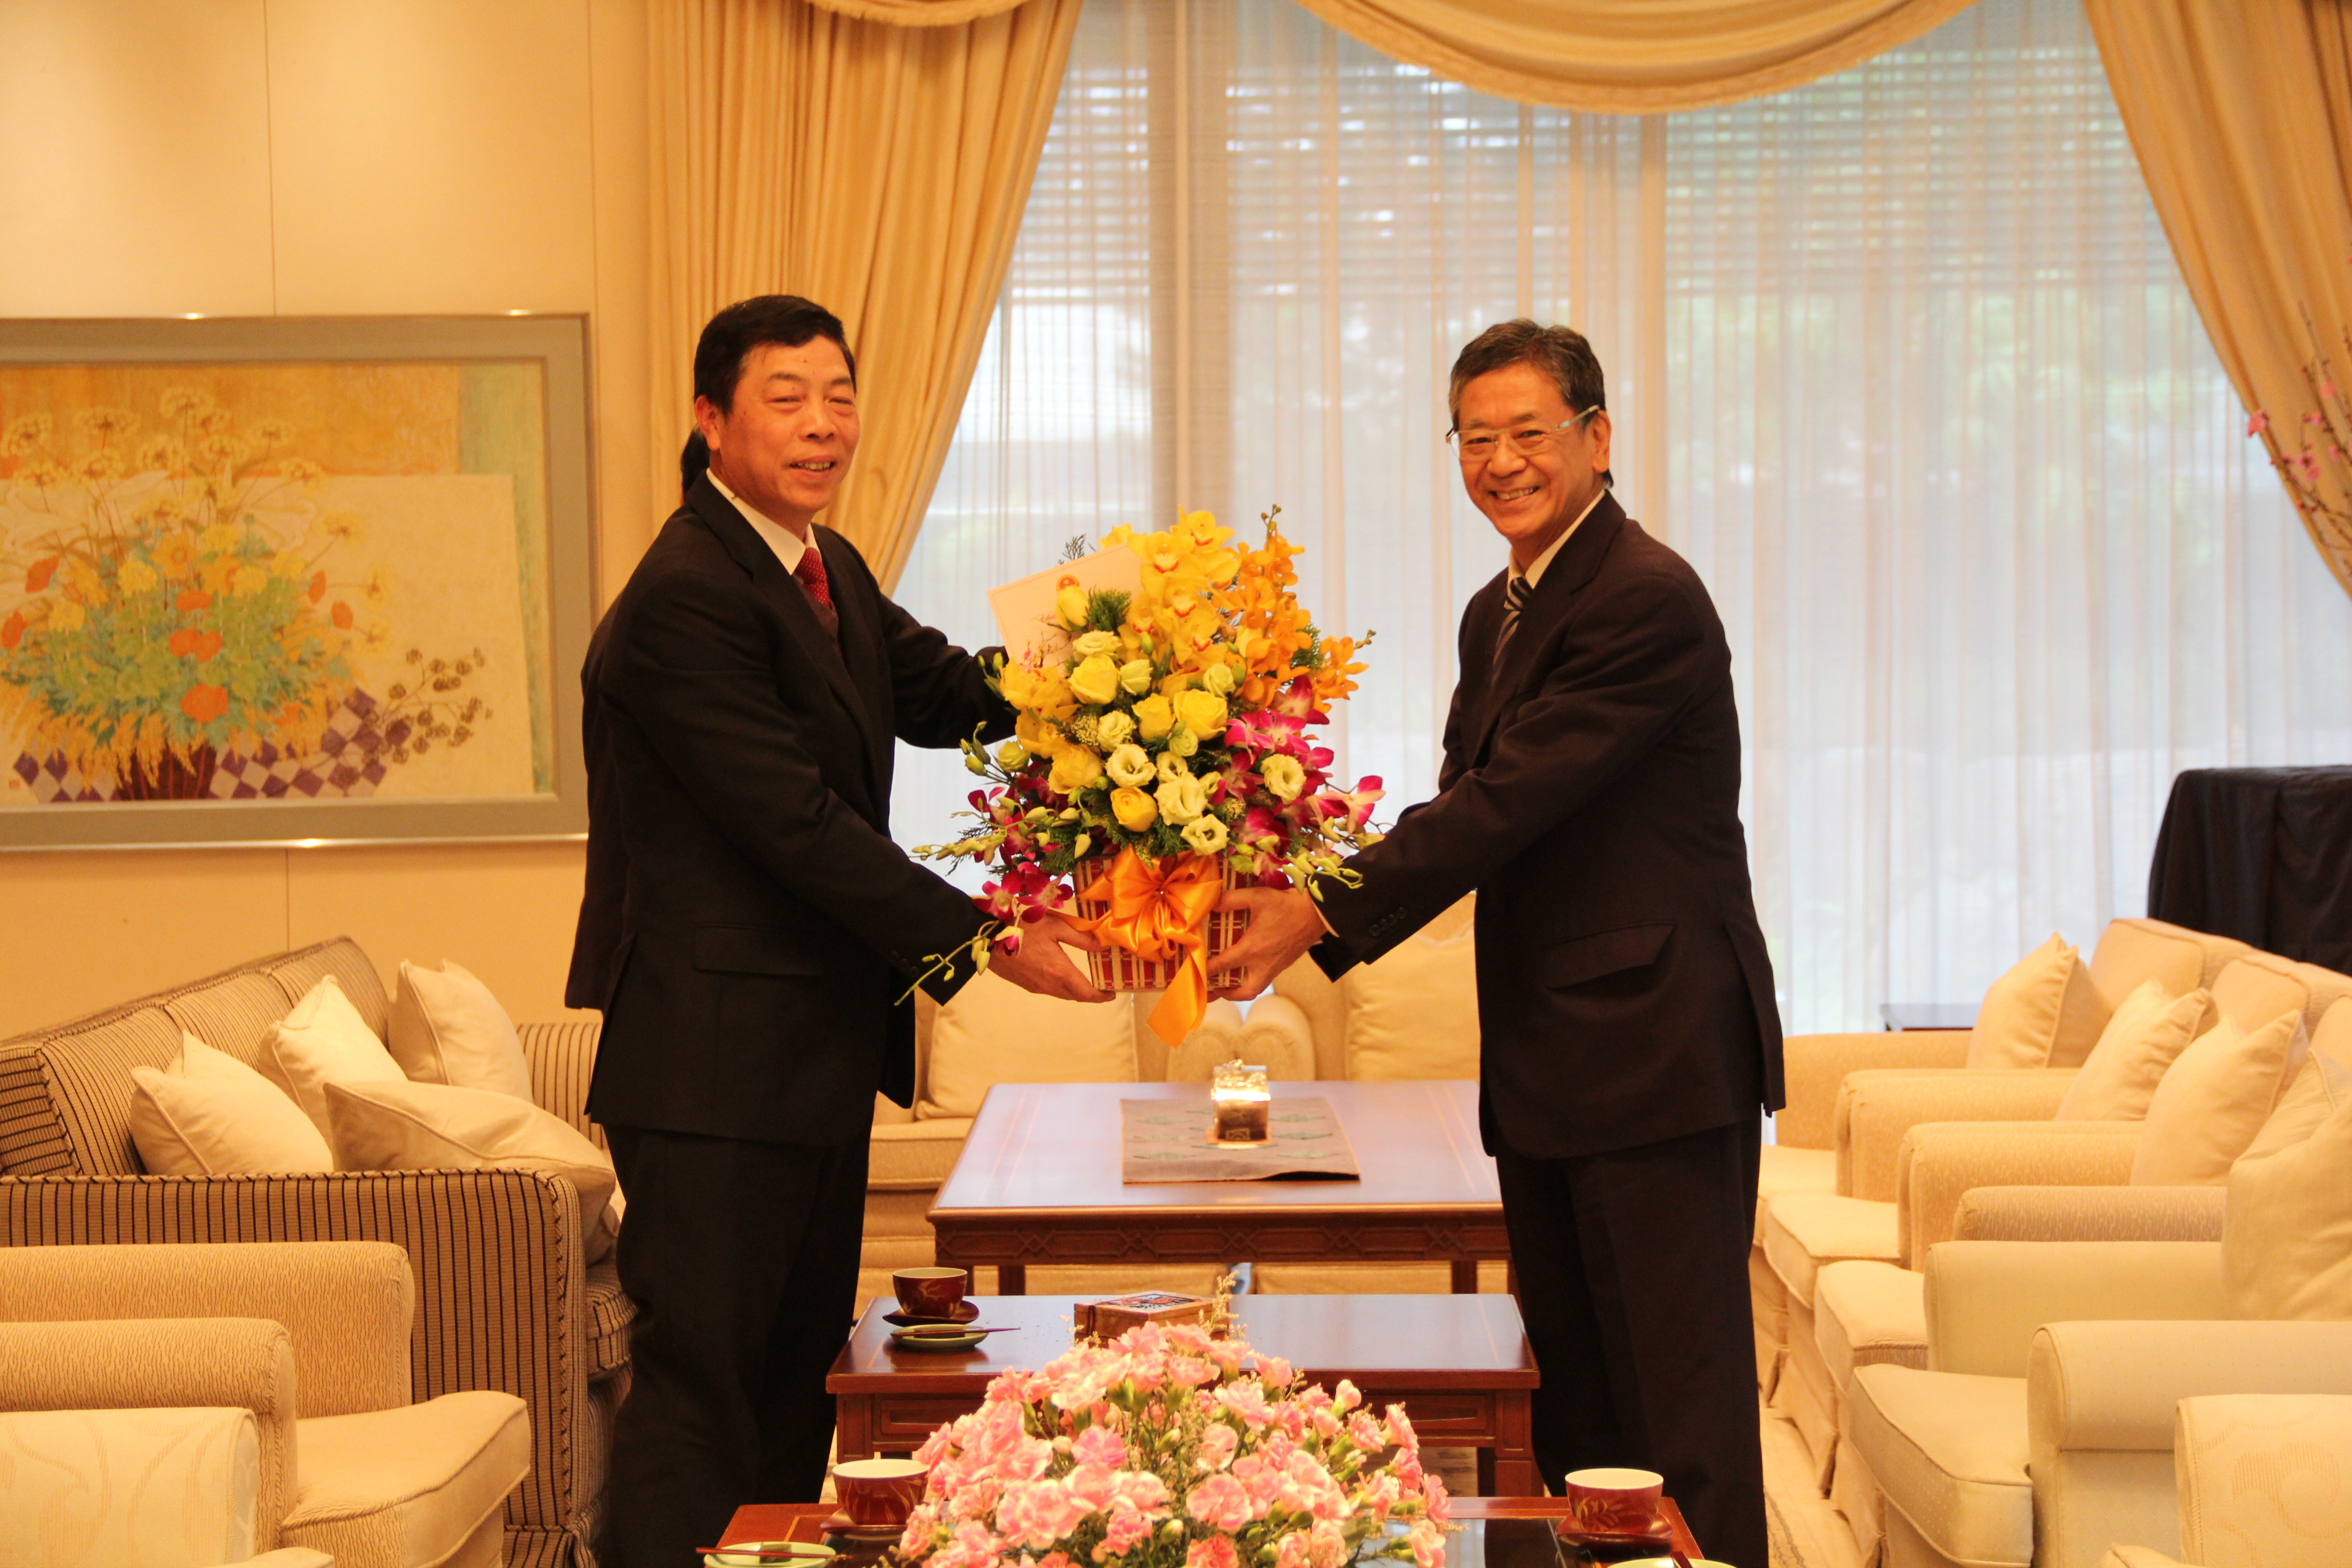 CHAIRMAN OF BAC GIANG PROVINCE PAYS A COURTESY VISIT AND GREETS NEW YEAR TO JAPANESE AMBASSADOR...